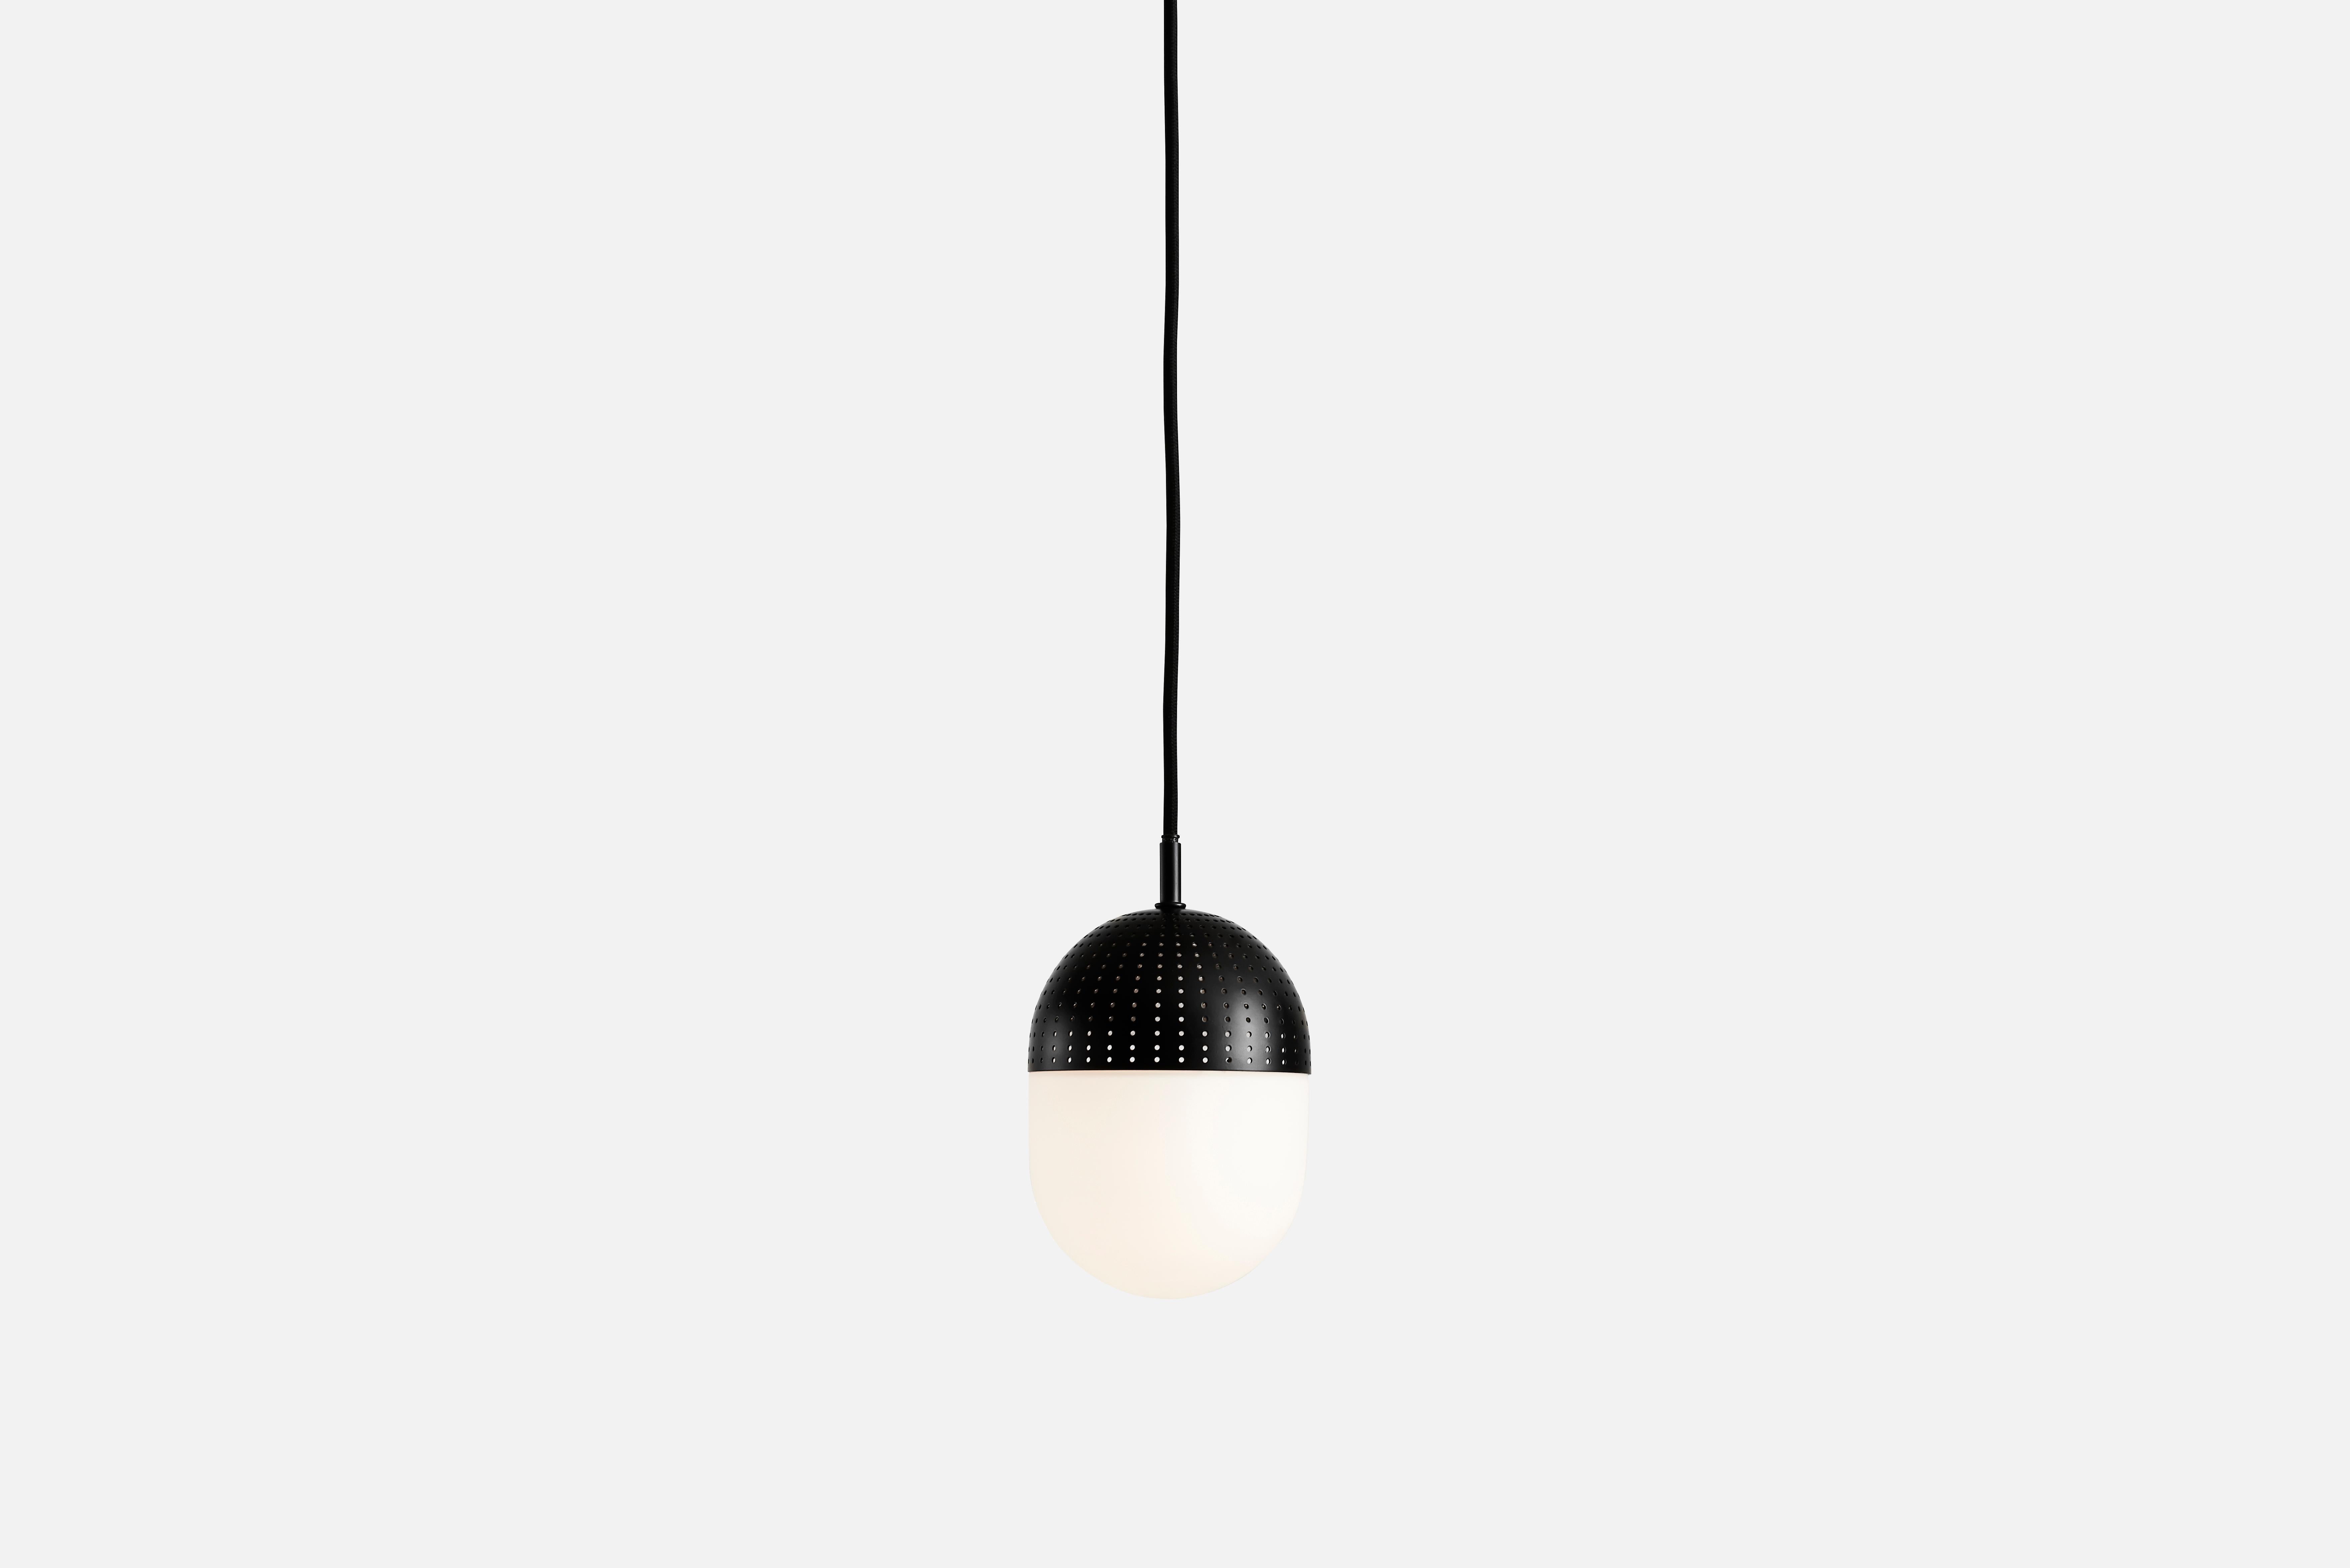 Medium black dot pendant lamp by Rikke Frost.
Materials: metal, glass.
Dimensions: D 14 x H 16.6 cm.
Available in black or satin and in 3 sizes: H 13, H 16.6, H 21 cm.

Rikke Frost is a Danish graduate from the School of Architecture Aarhus.